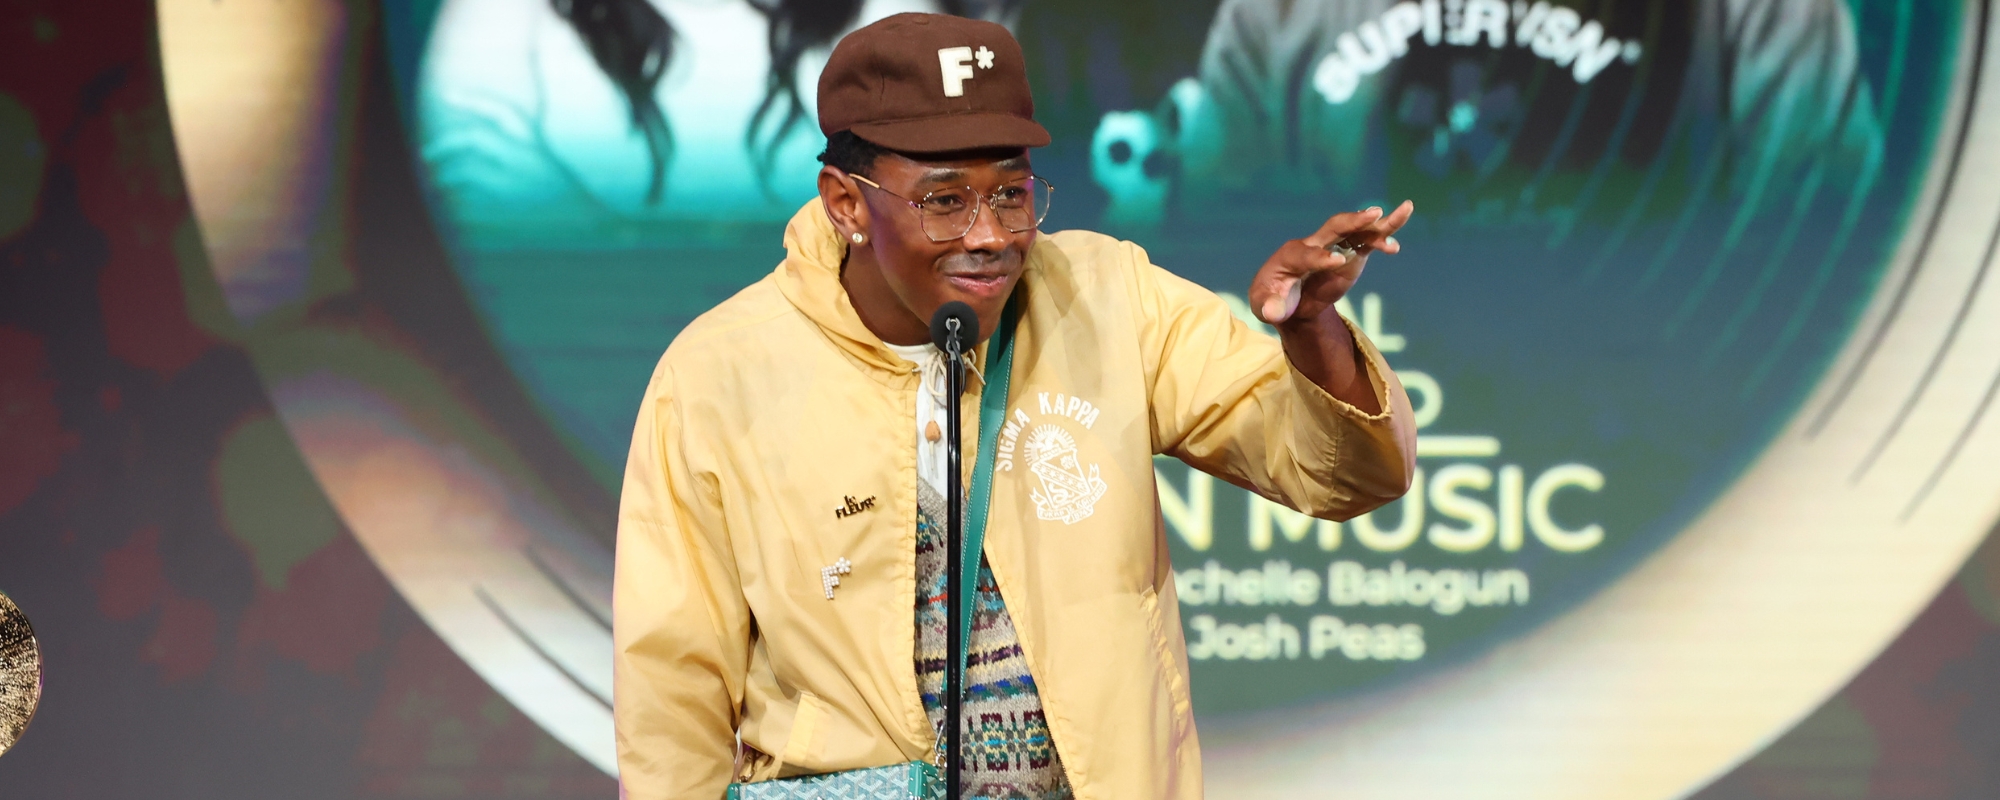 Goodbye New Music Fridays? Tyler, The Creator Calls for Industry Change